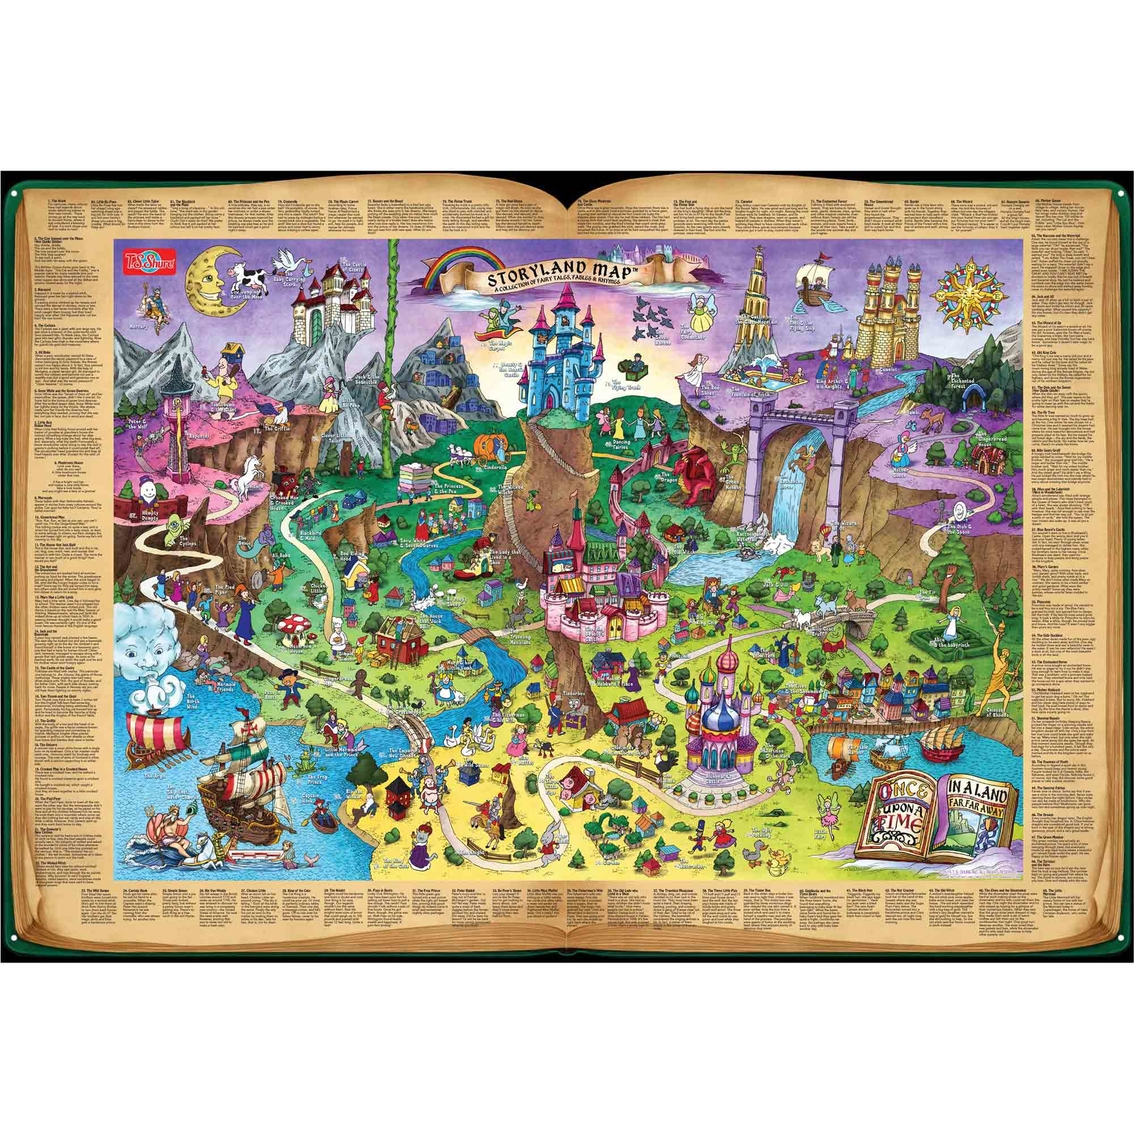 T.S. Shure Storyland Map Pictorial Poster - Image 2 of 4